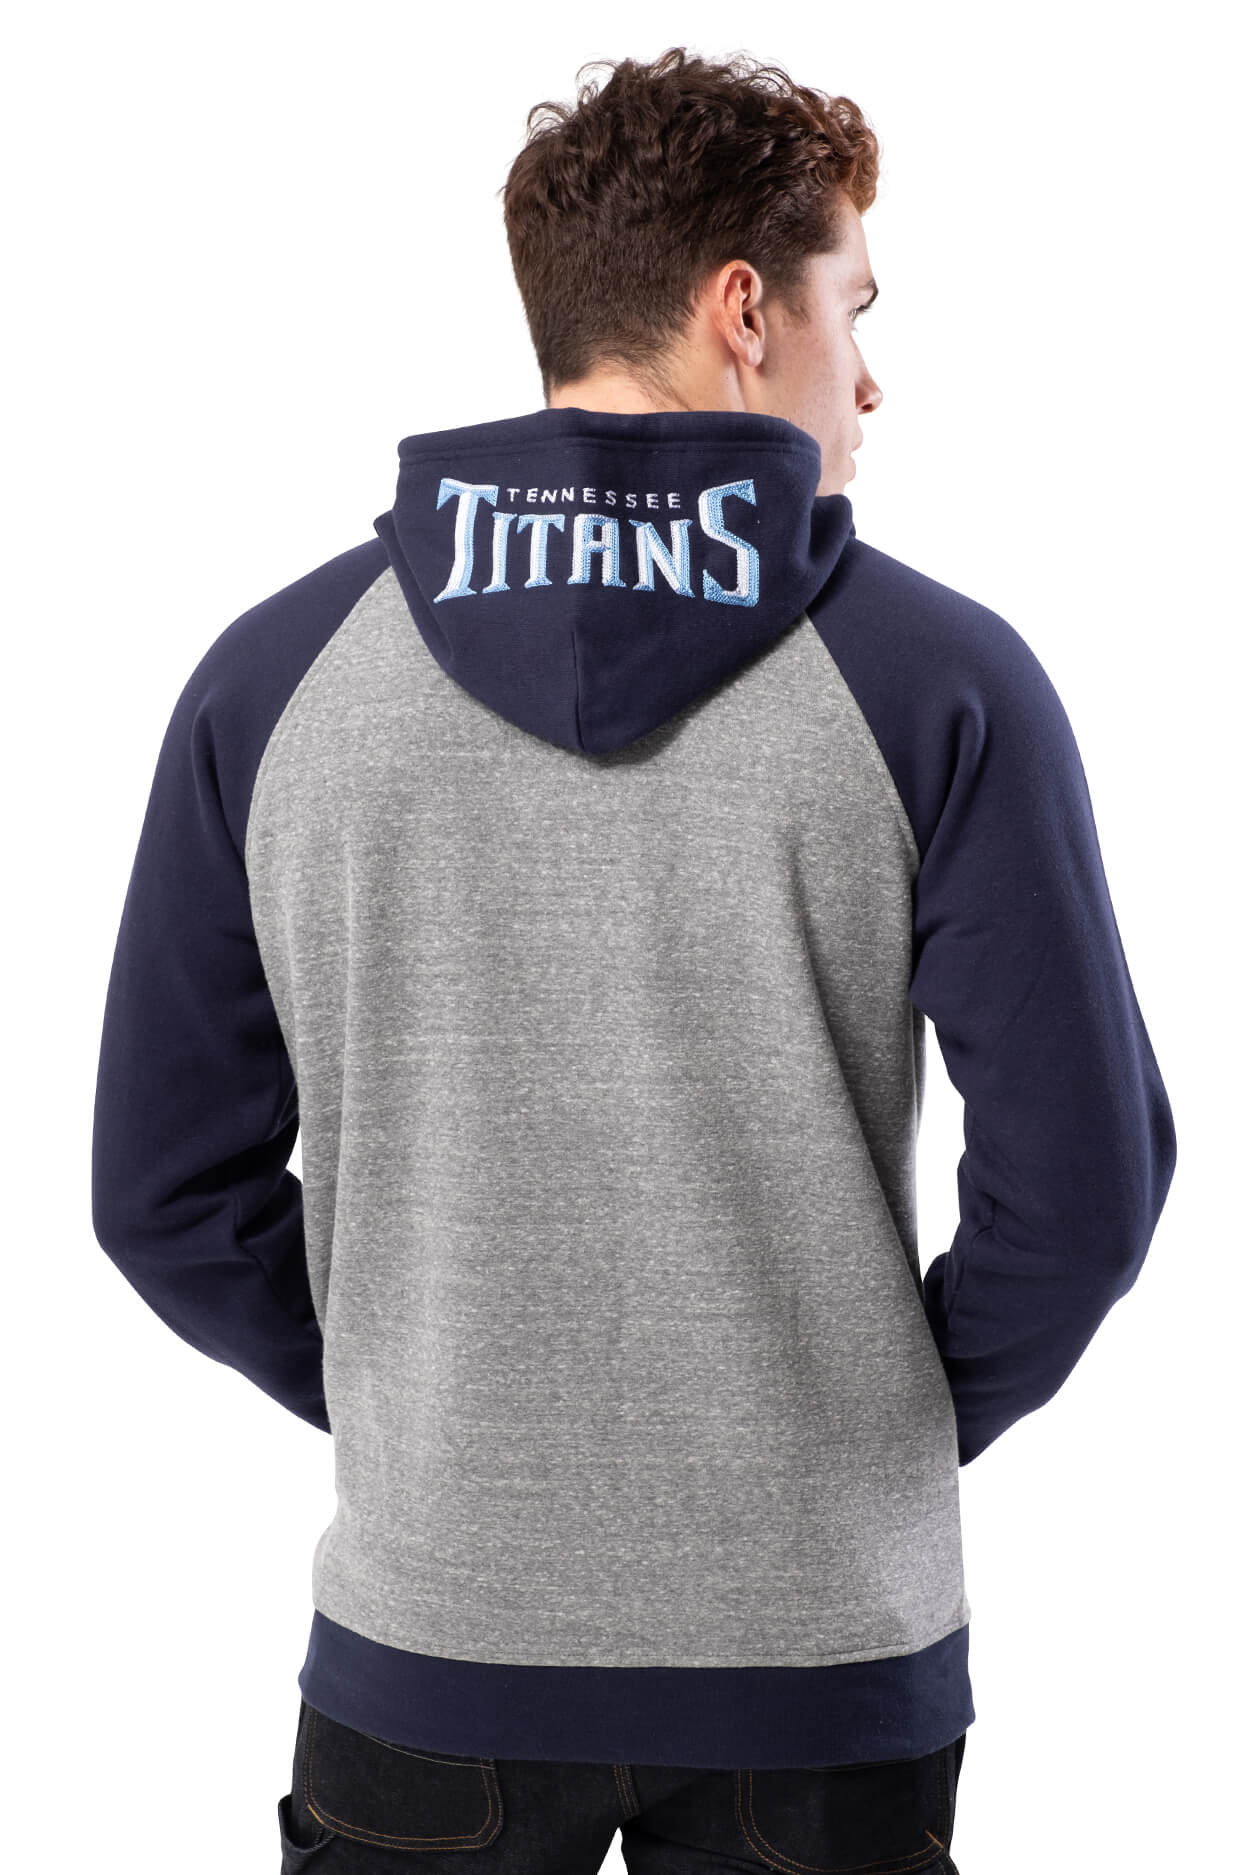 NFL Tennessee Titans Men's Full Zip Hoodie|Tennessee Titans